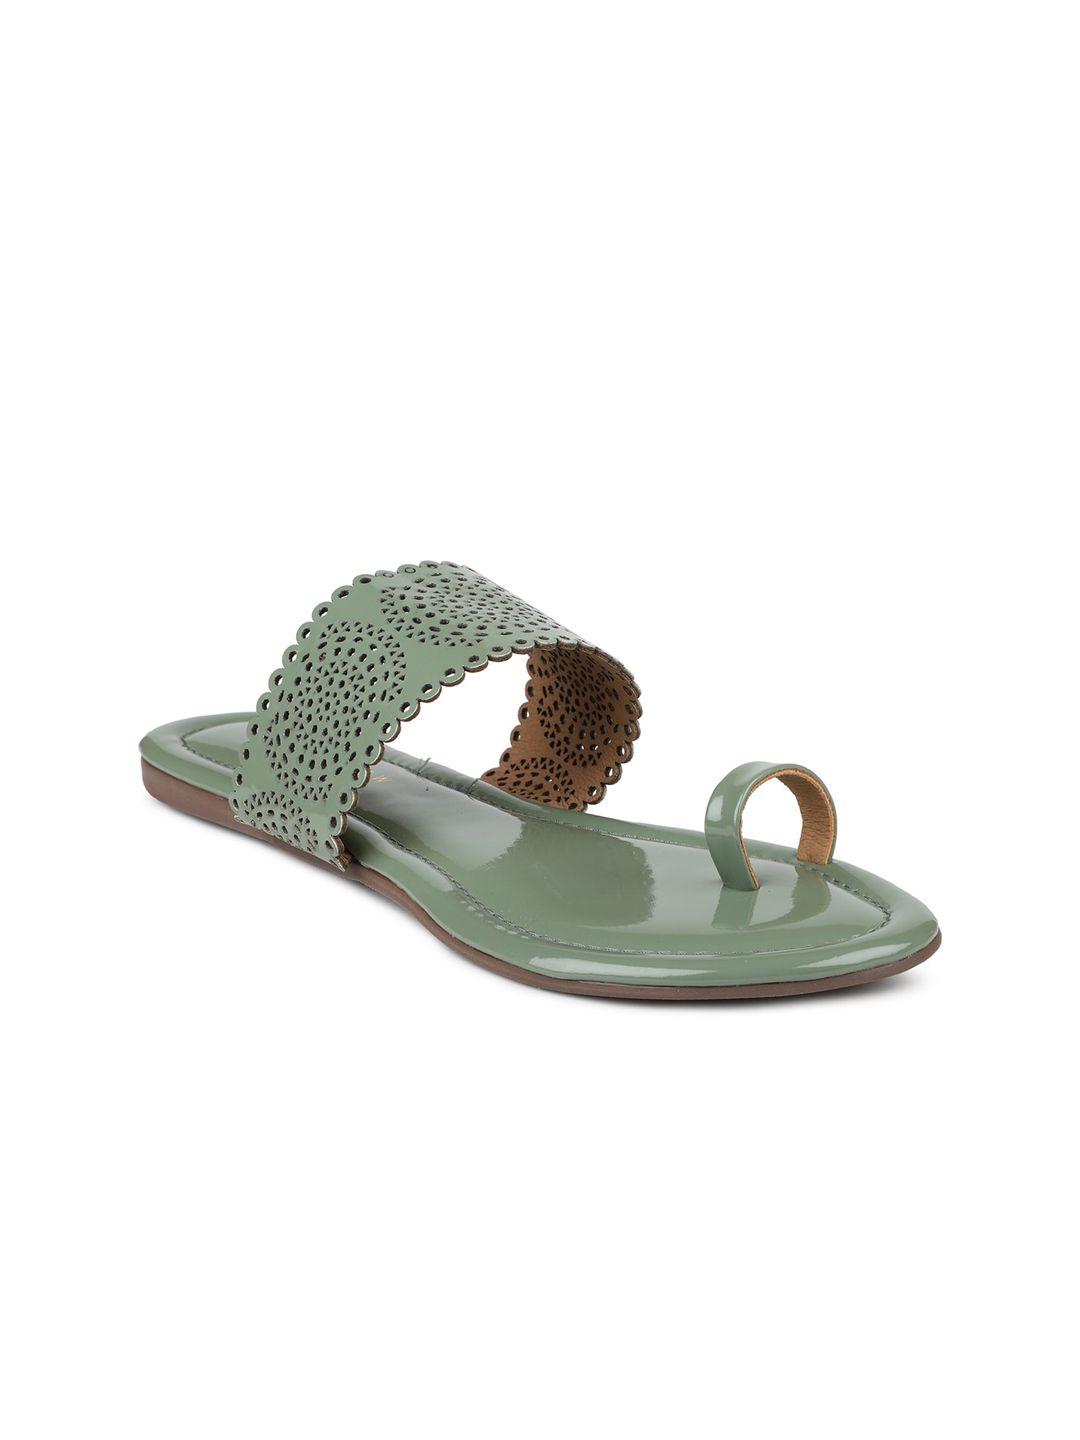 design crew women green textured one toe flats with laser cuts